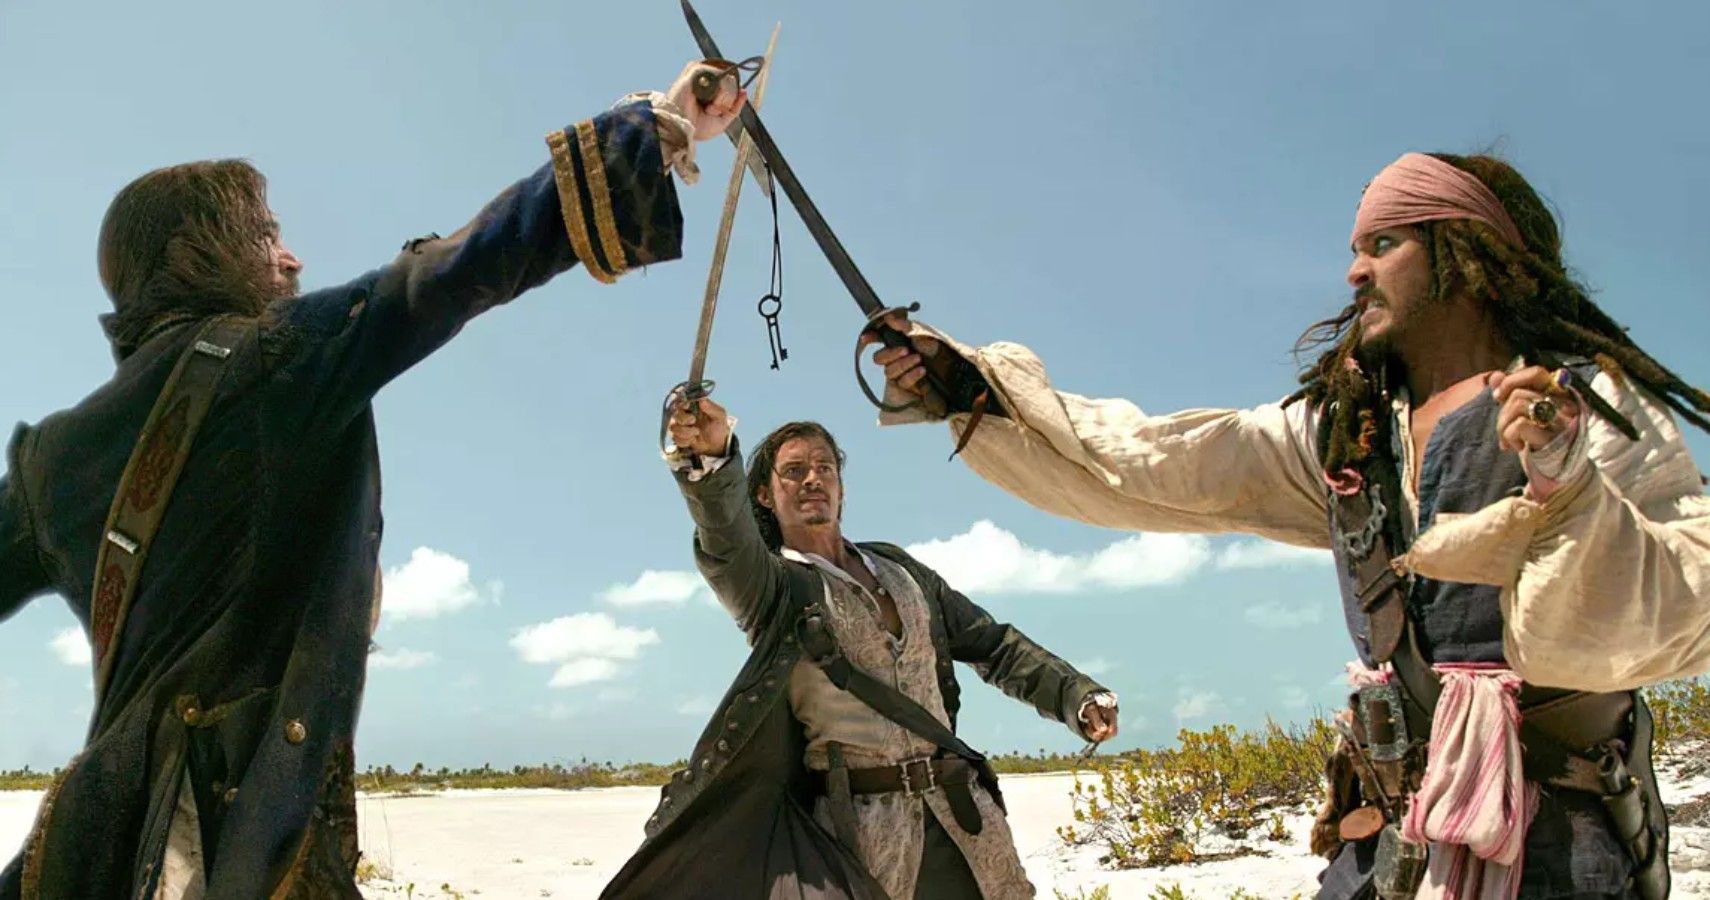 pirates-of-the-caribbean-dead-man's-chest-duel-norrington-will-turner-jack-sparrow.-featured